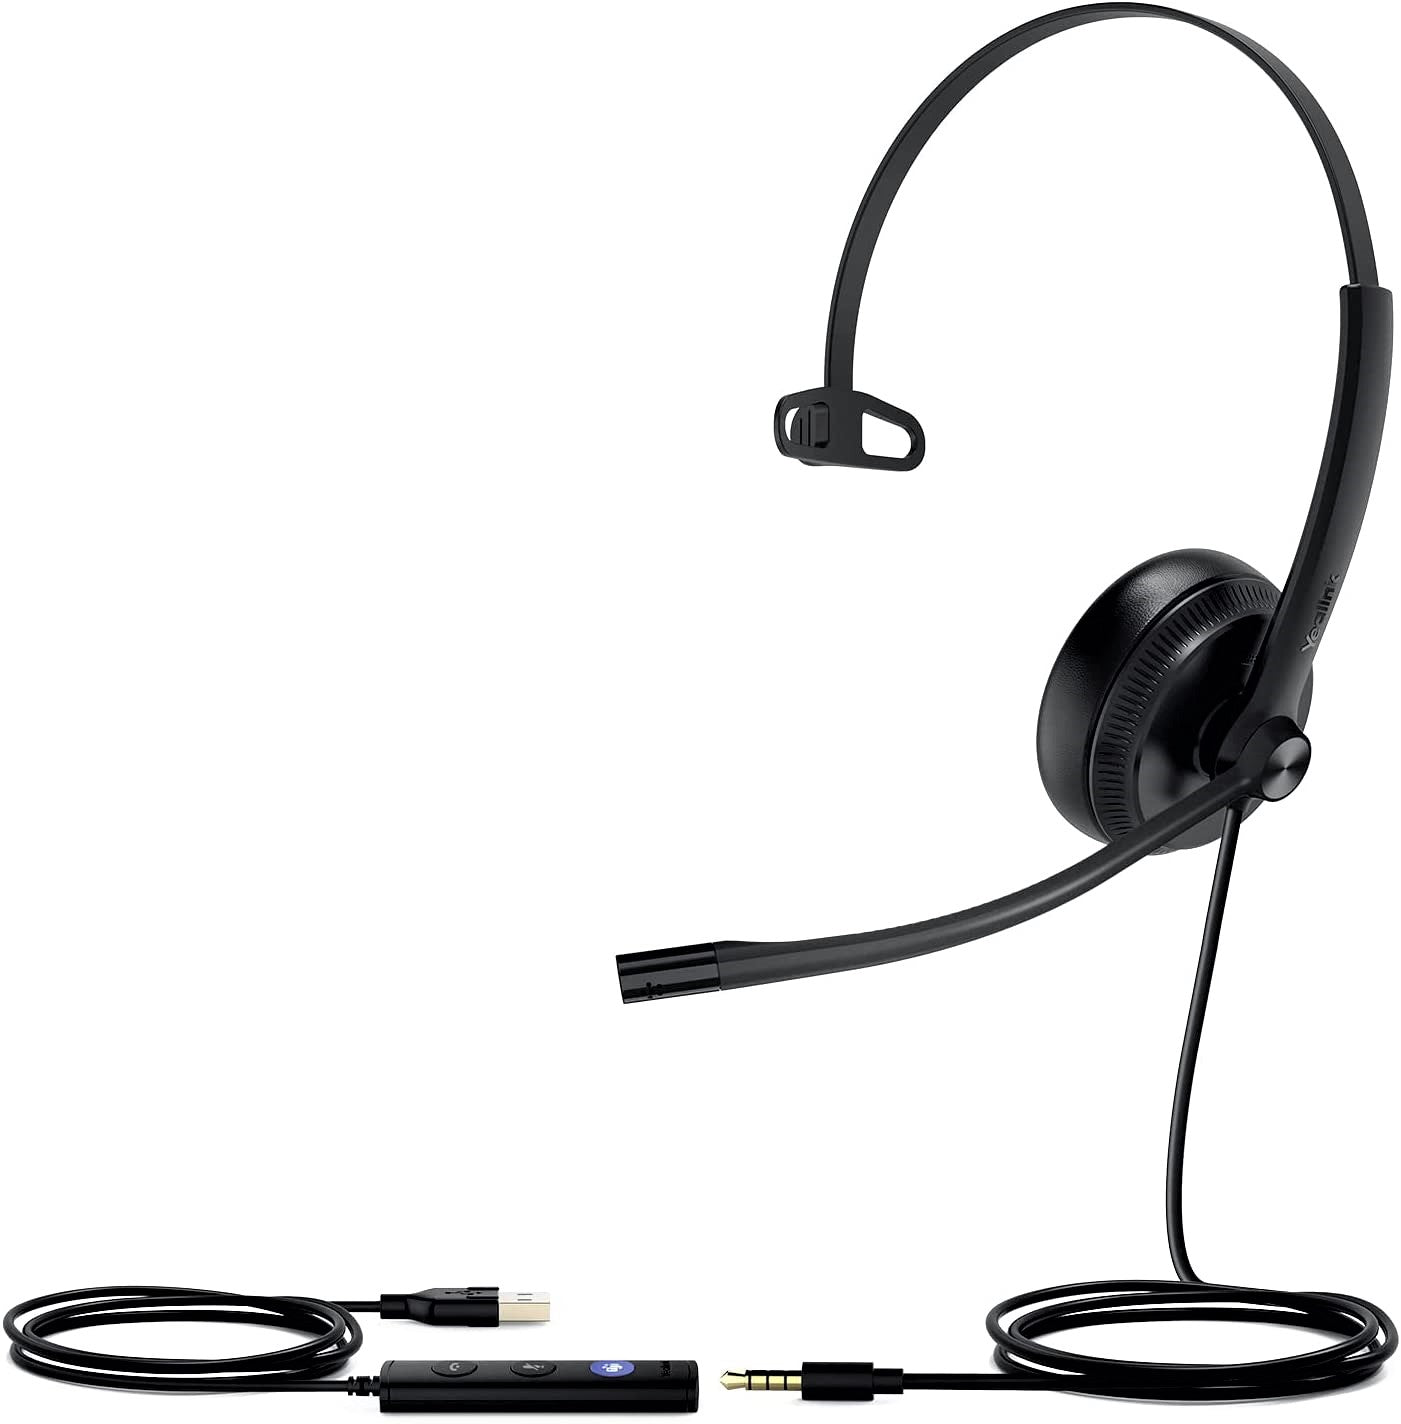 Yealink UH34 SE Mono USB-A Wired Headset